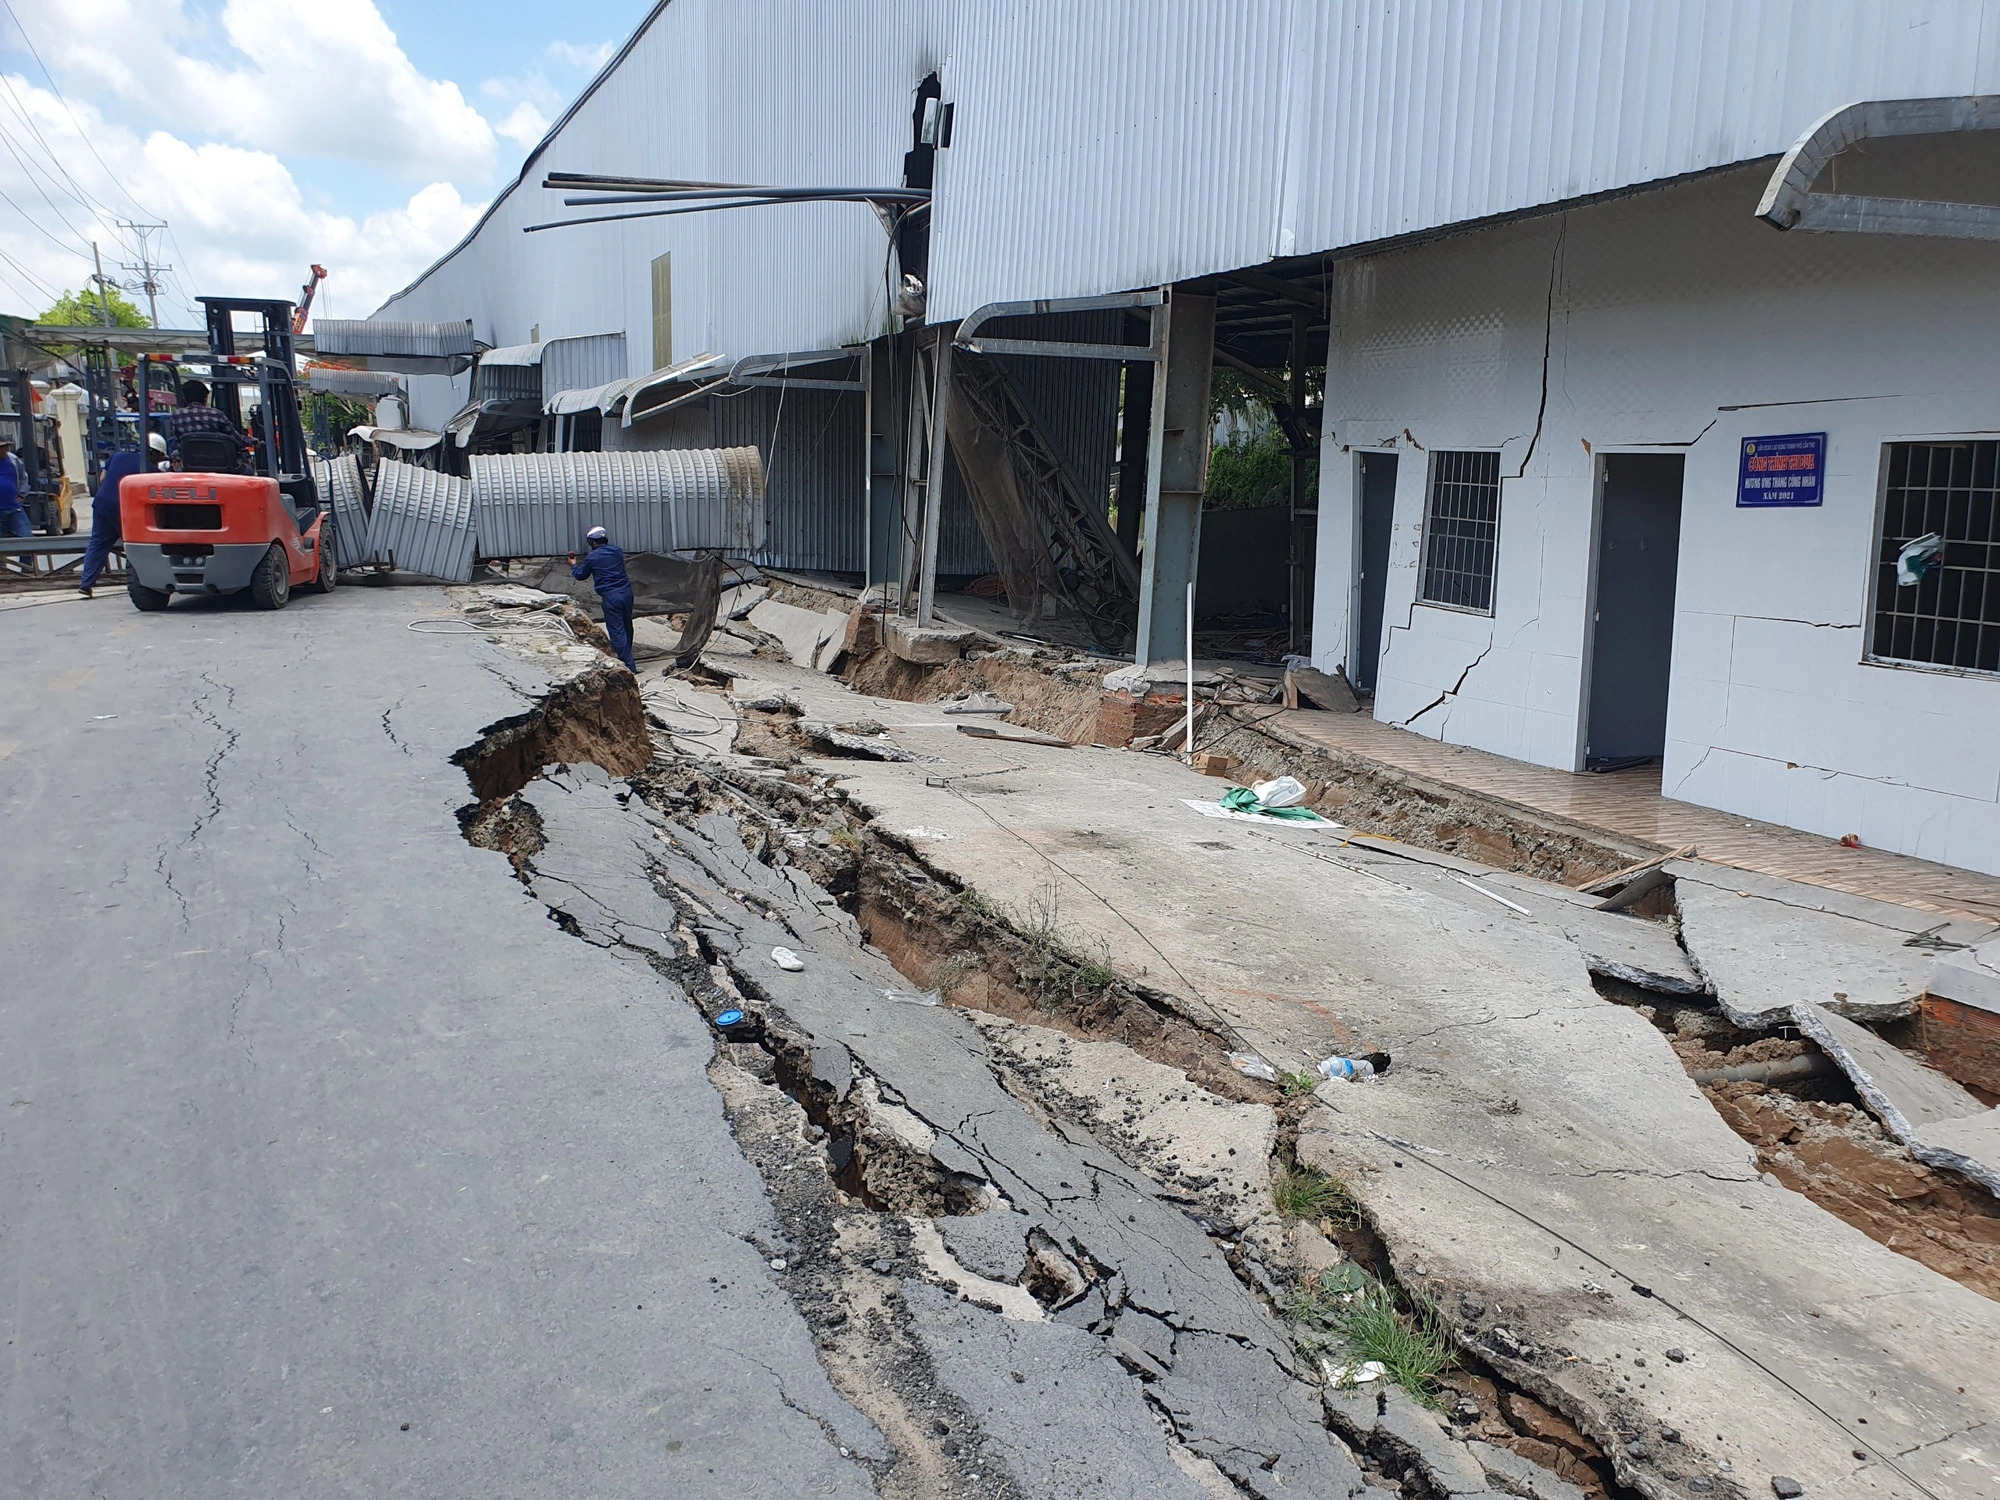 Land subsidence showed no signs of abating on a road next to the warehouse. Photo: T.L.